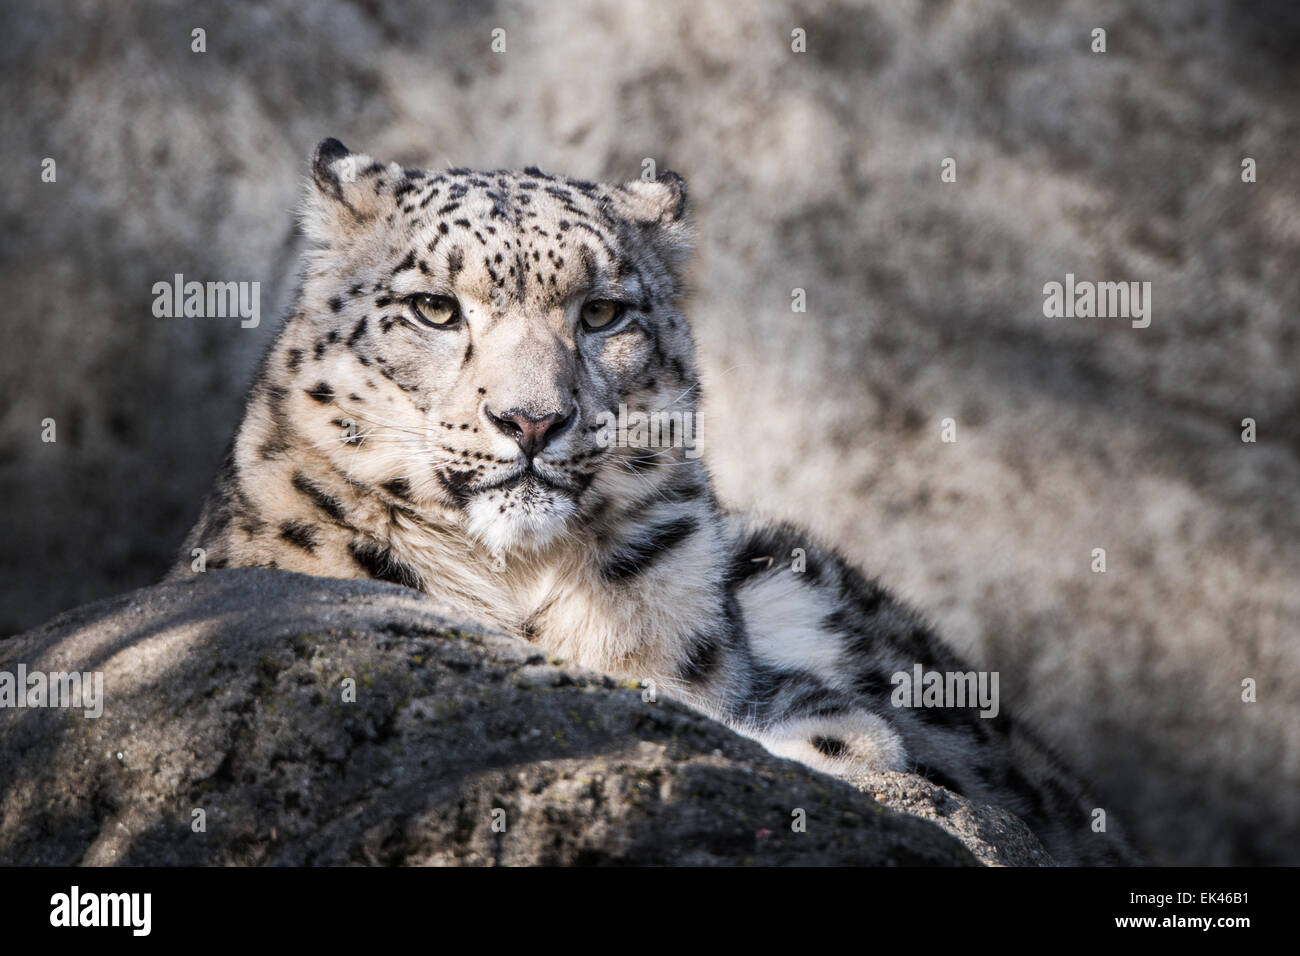 Frontal Portrait of Snow Leopard in Snow Stock Photo